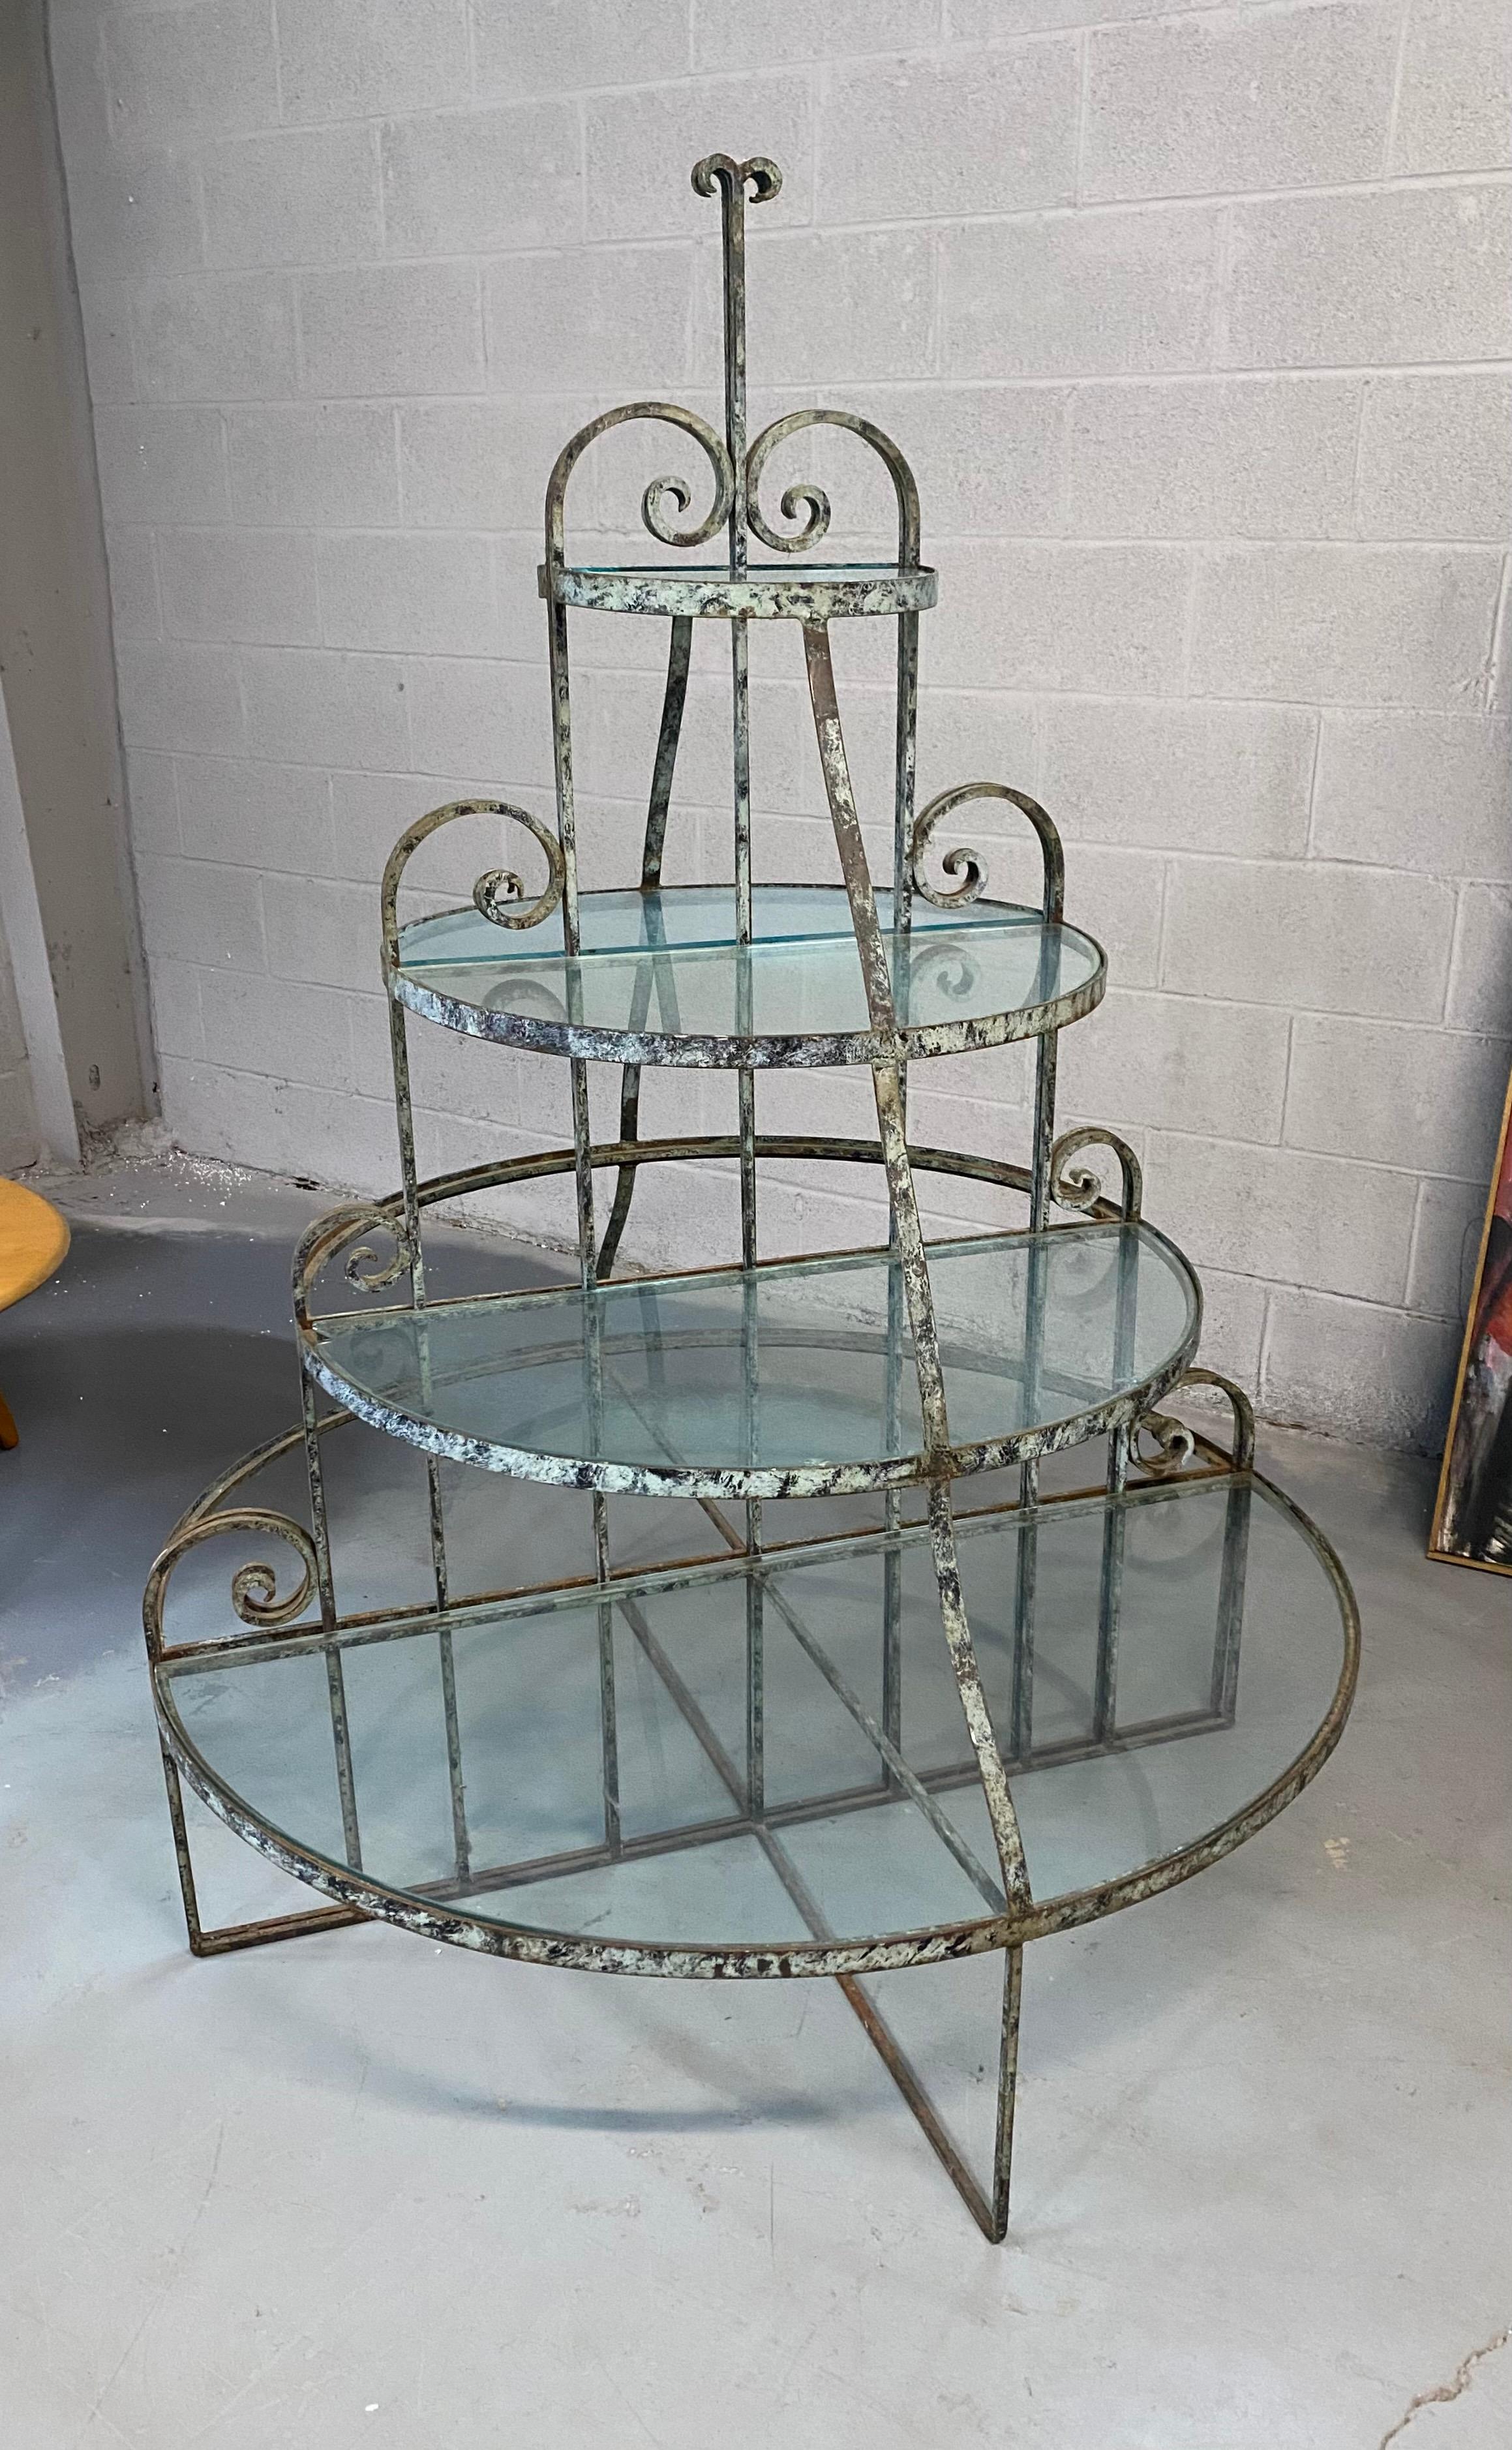 Pair of Art Deco Wrought Iron Store Displays / Stands / Fixtures /Shelves In Distressed Condition For Sale In Buffalo, NY